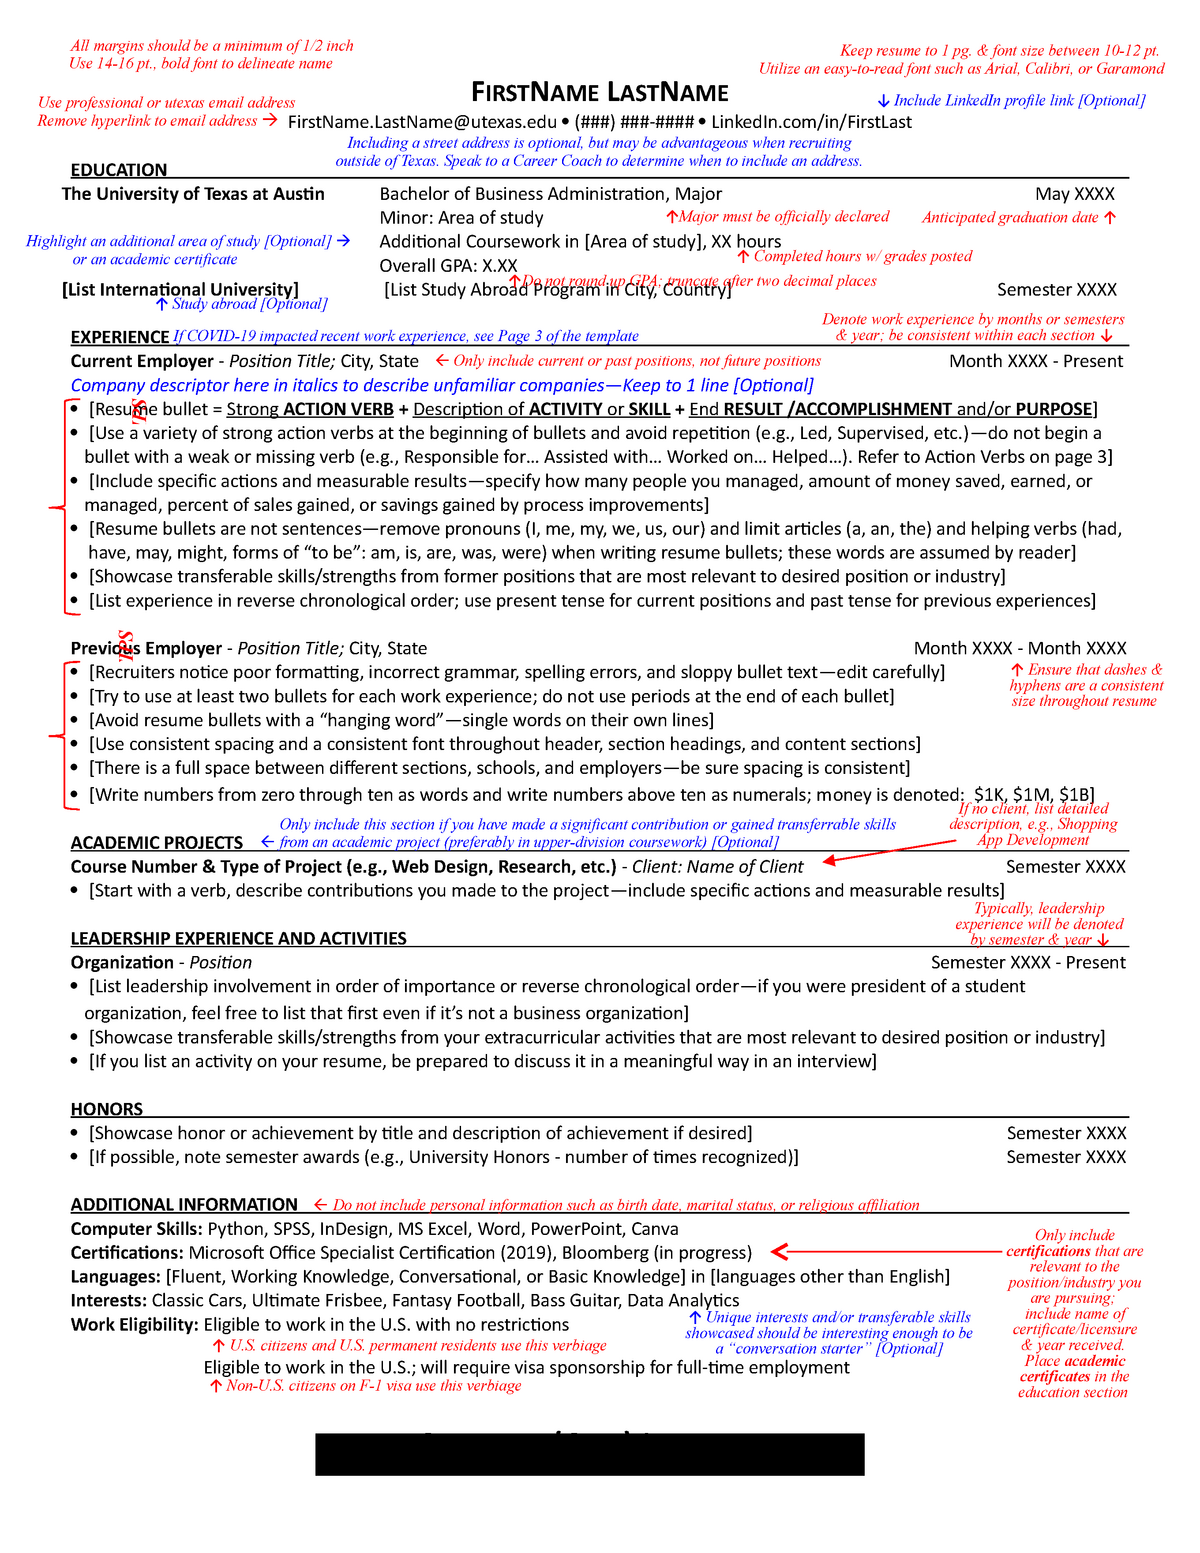 mccombs resume template